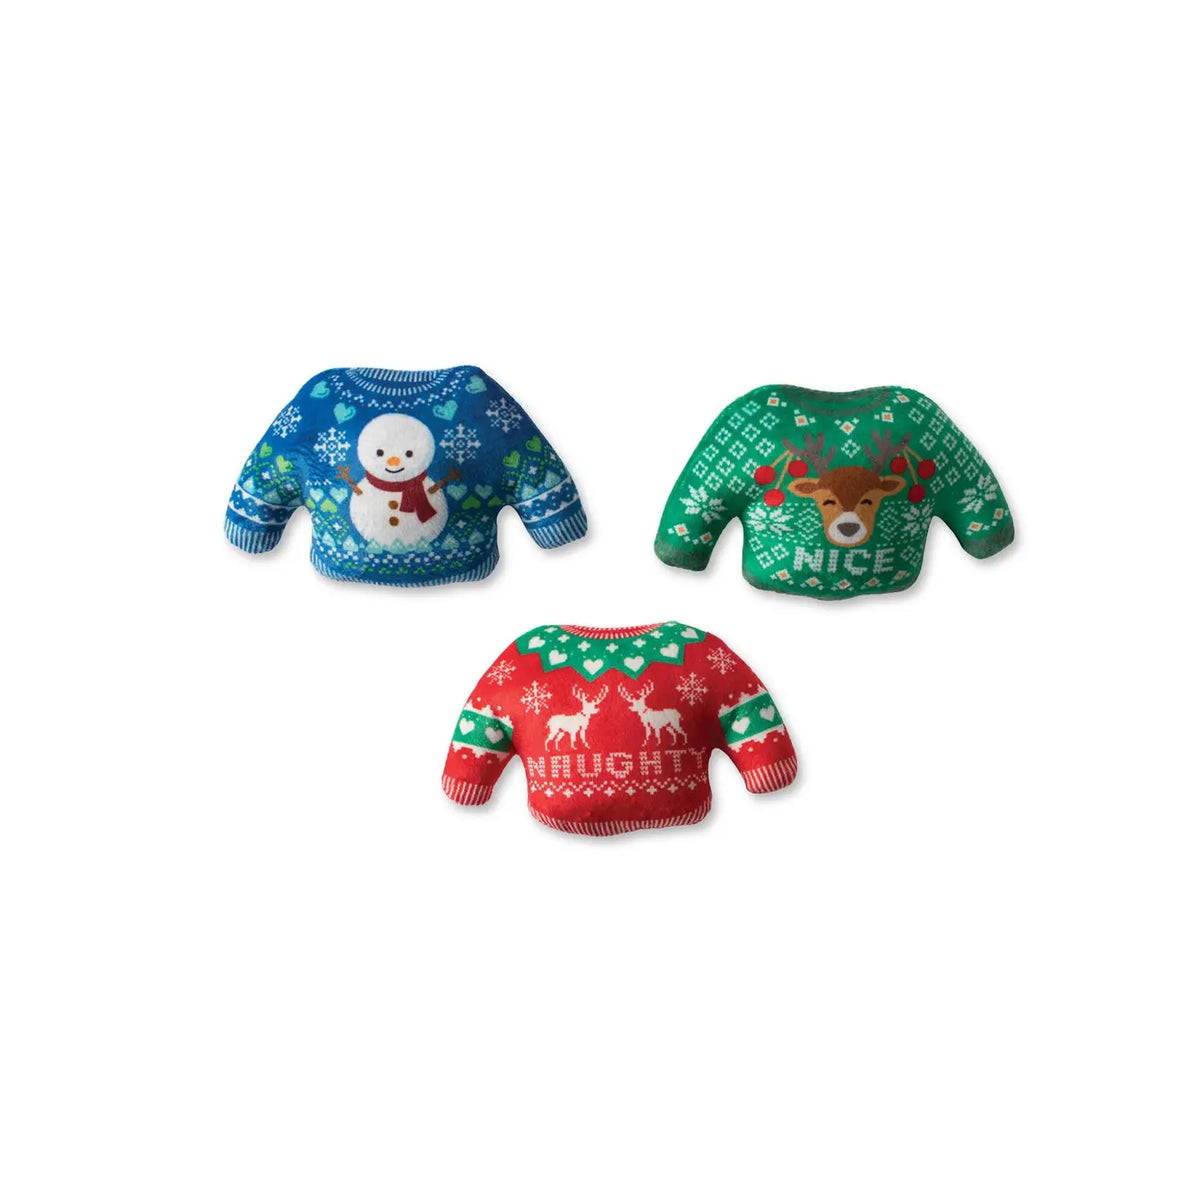 Petshop by Fringe Studio - Dog Toy The Snuggle Is Real 3 Christmas Sweaters